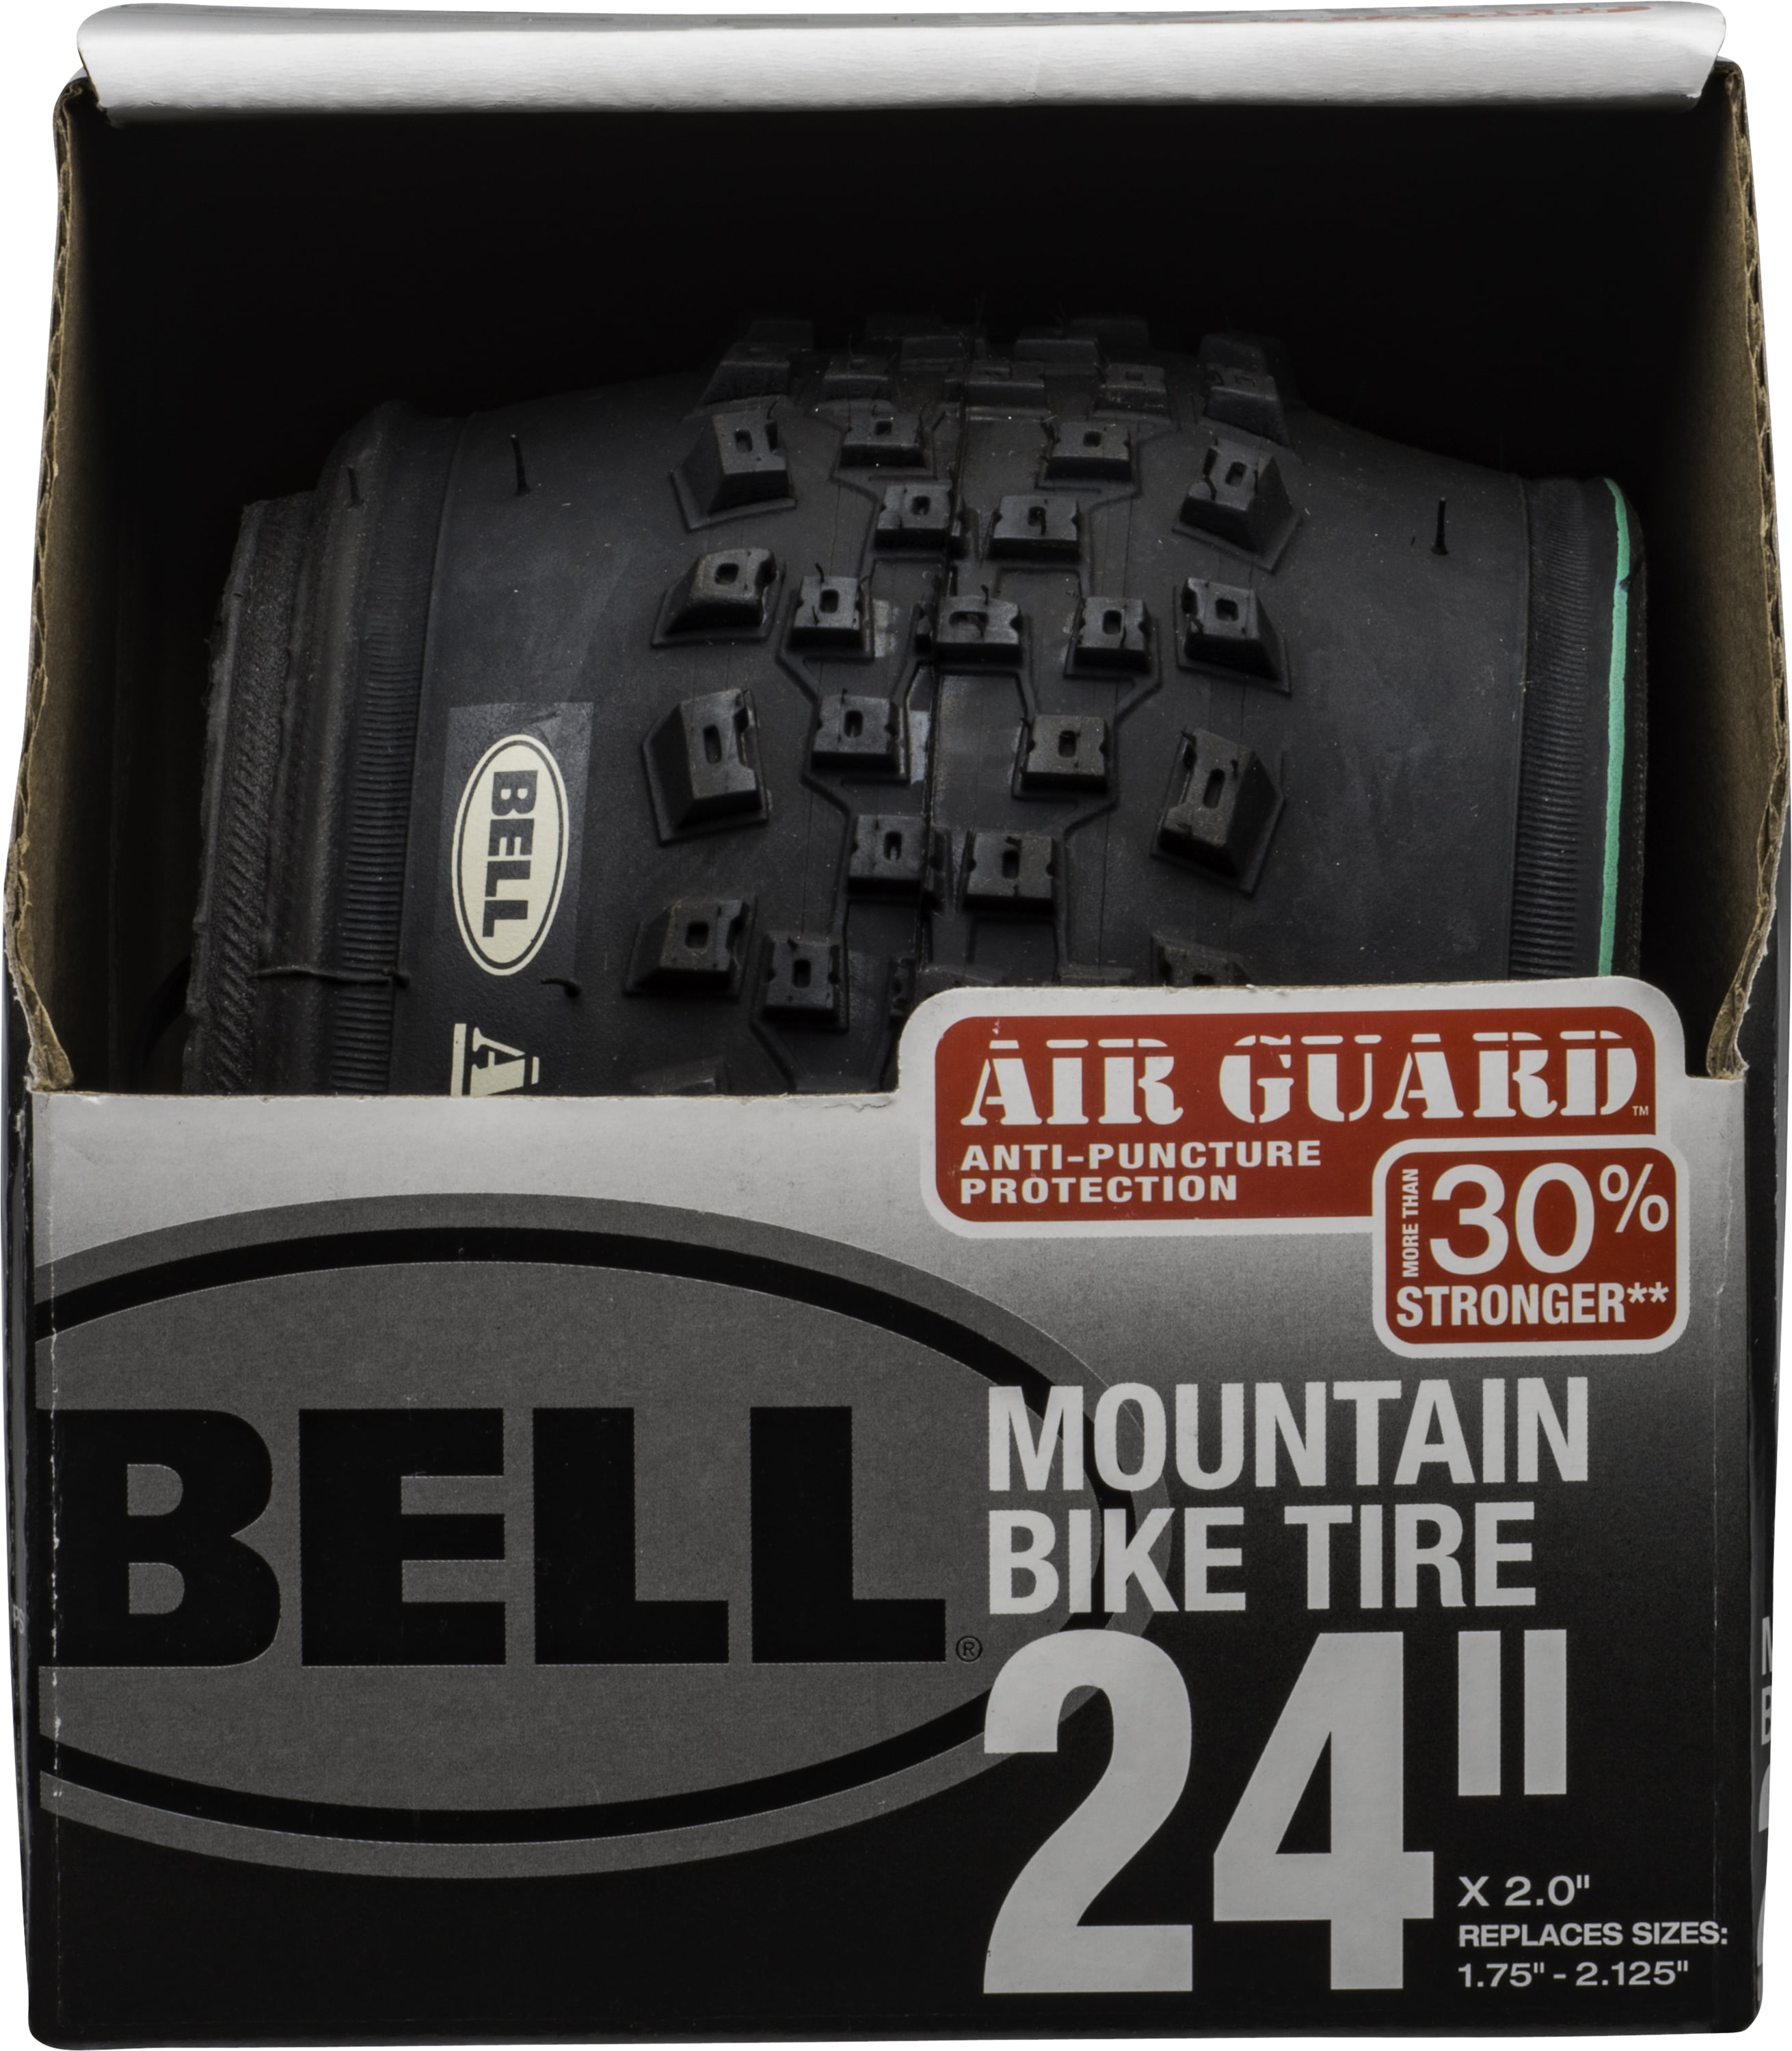 Details about   Bell Mountain Bike Tire 20” X 2.10” Air Guard Anti-Puncture Protection 